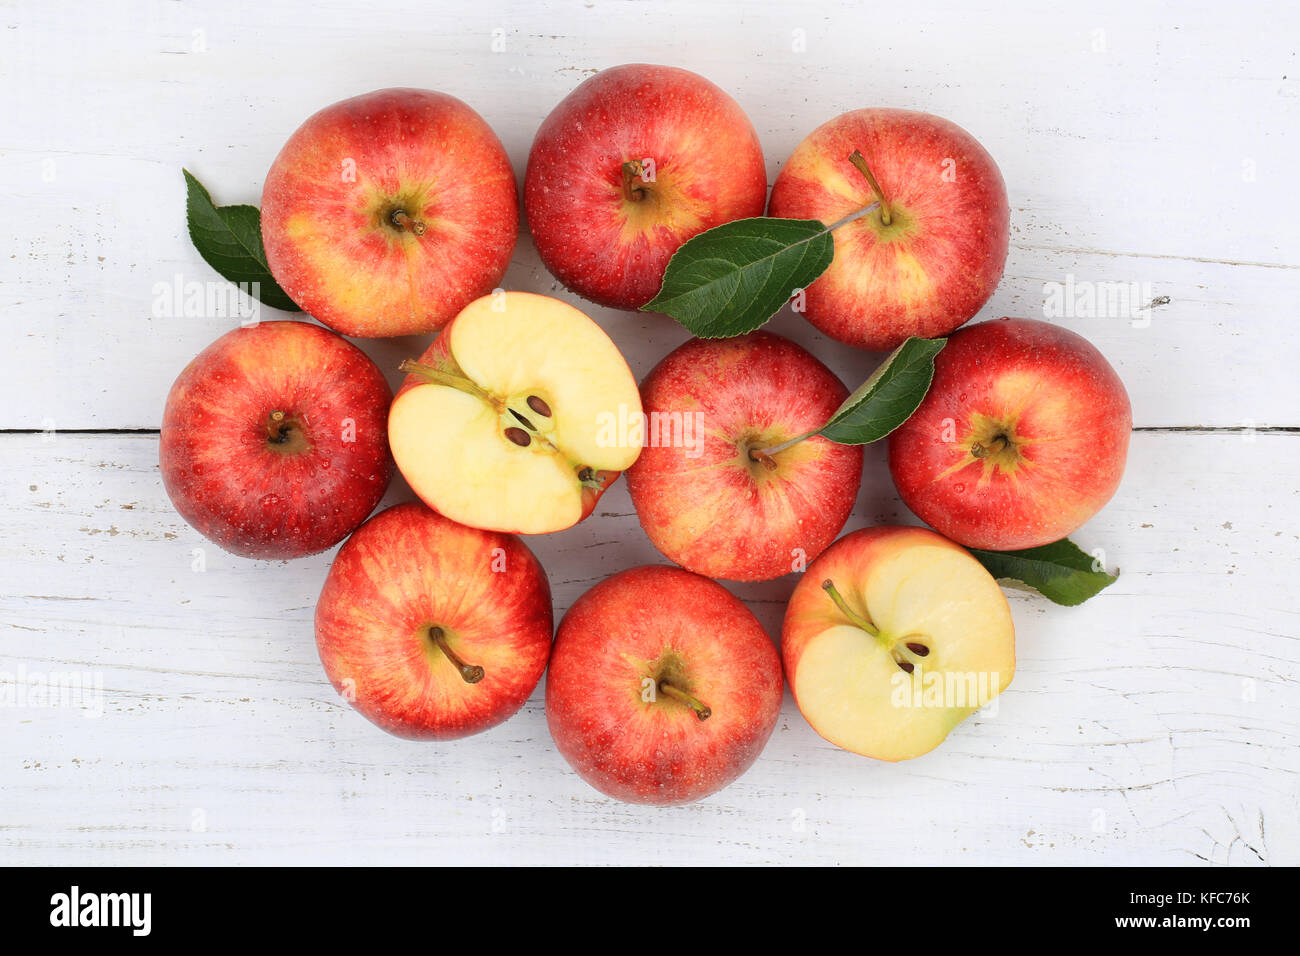 Apples apple fruit fruits red top view food Stock Photo